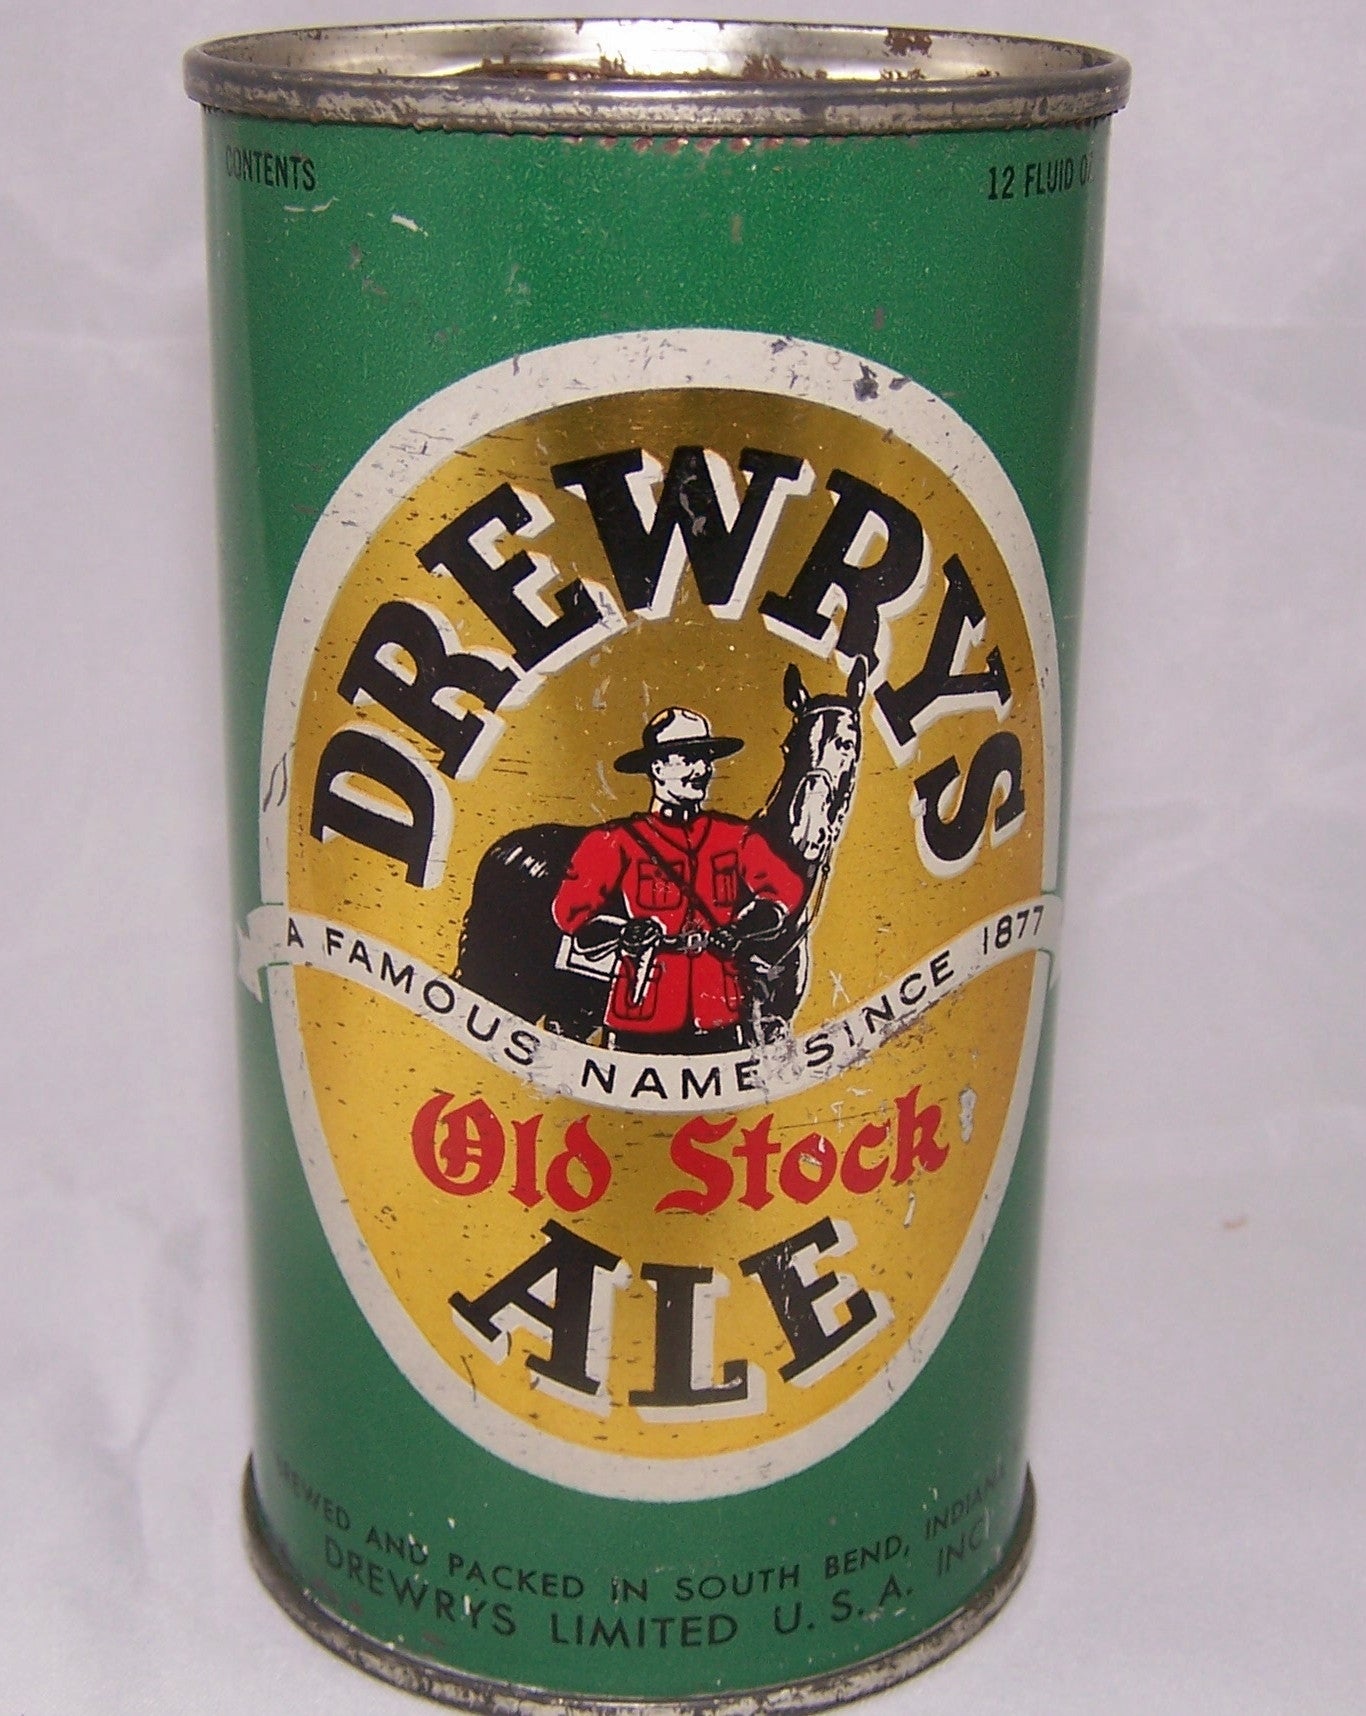 Drewrys Old Stock Ale, USBC 55-28, Grade 1- Sold on 04/16/16